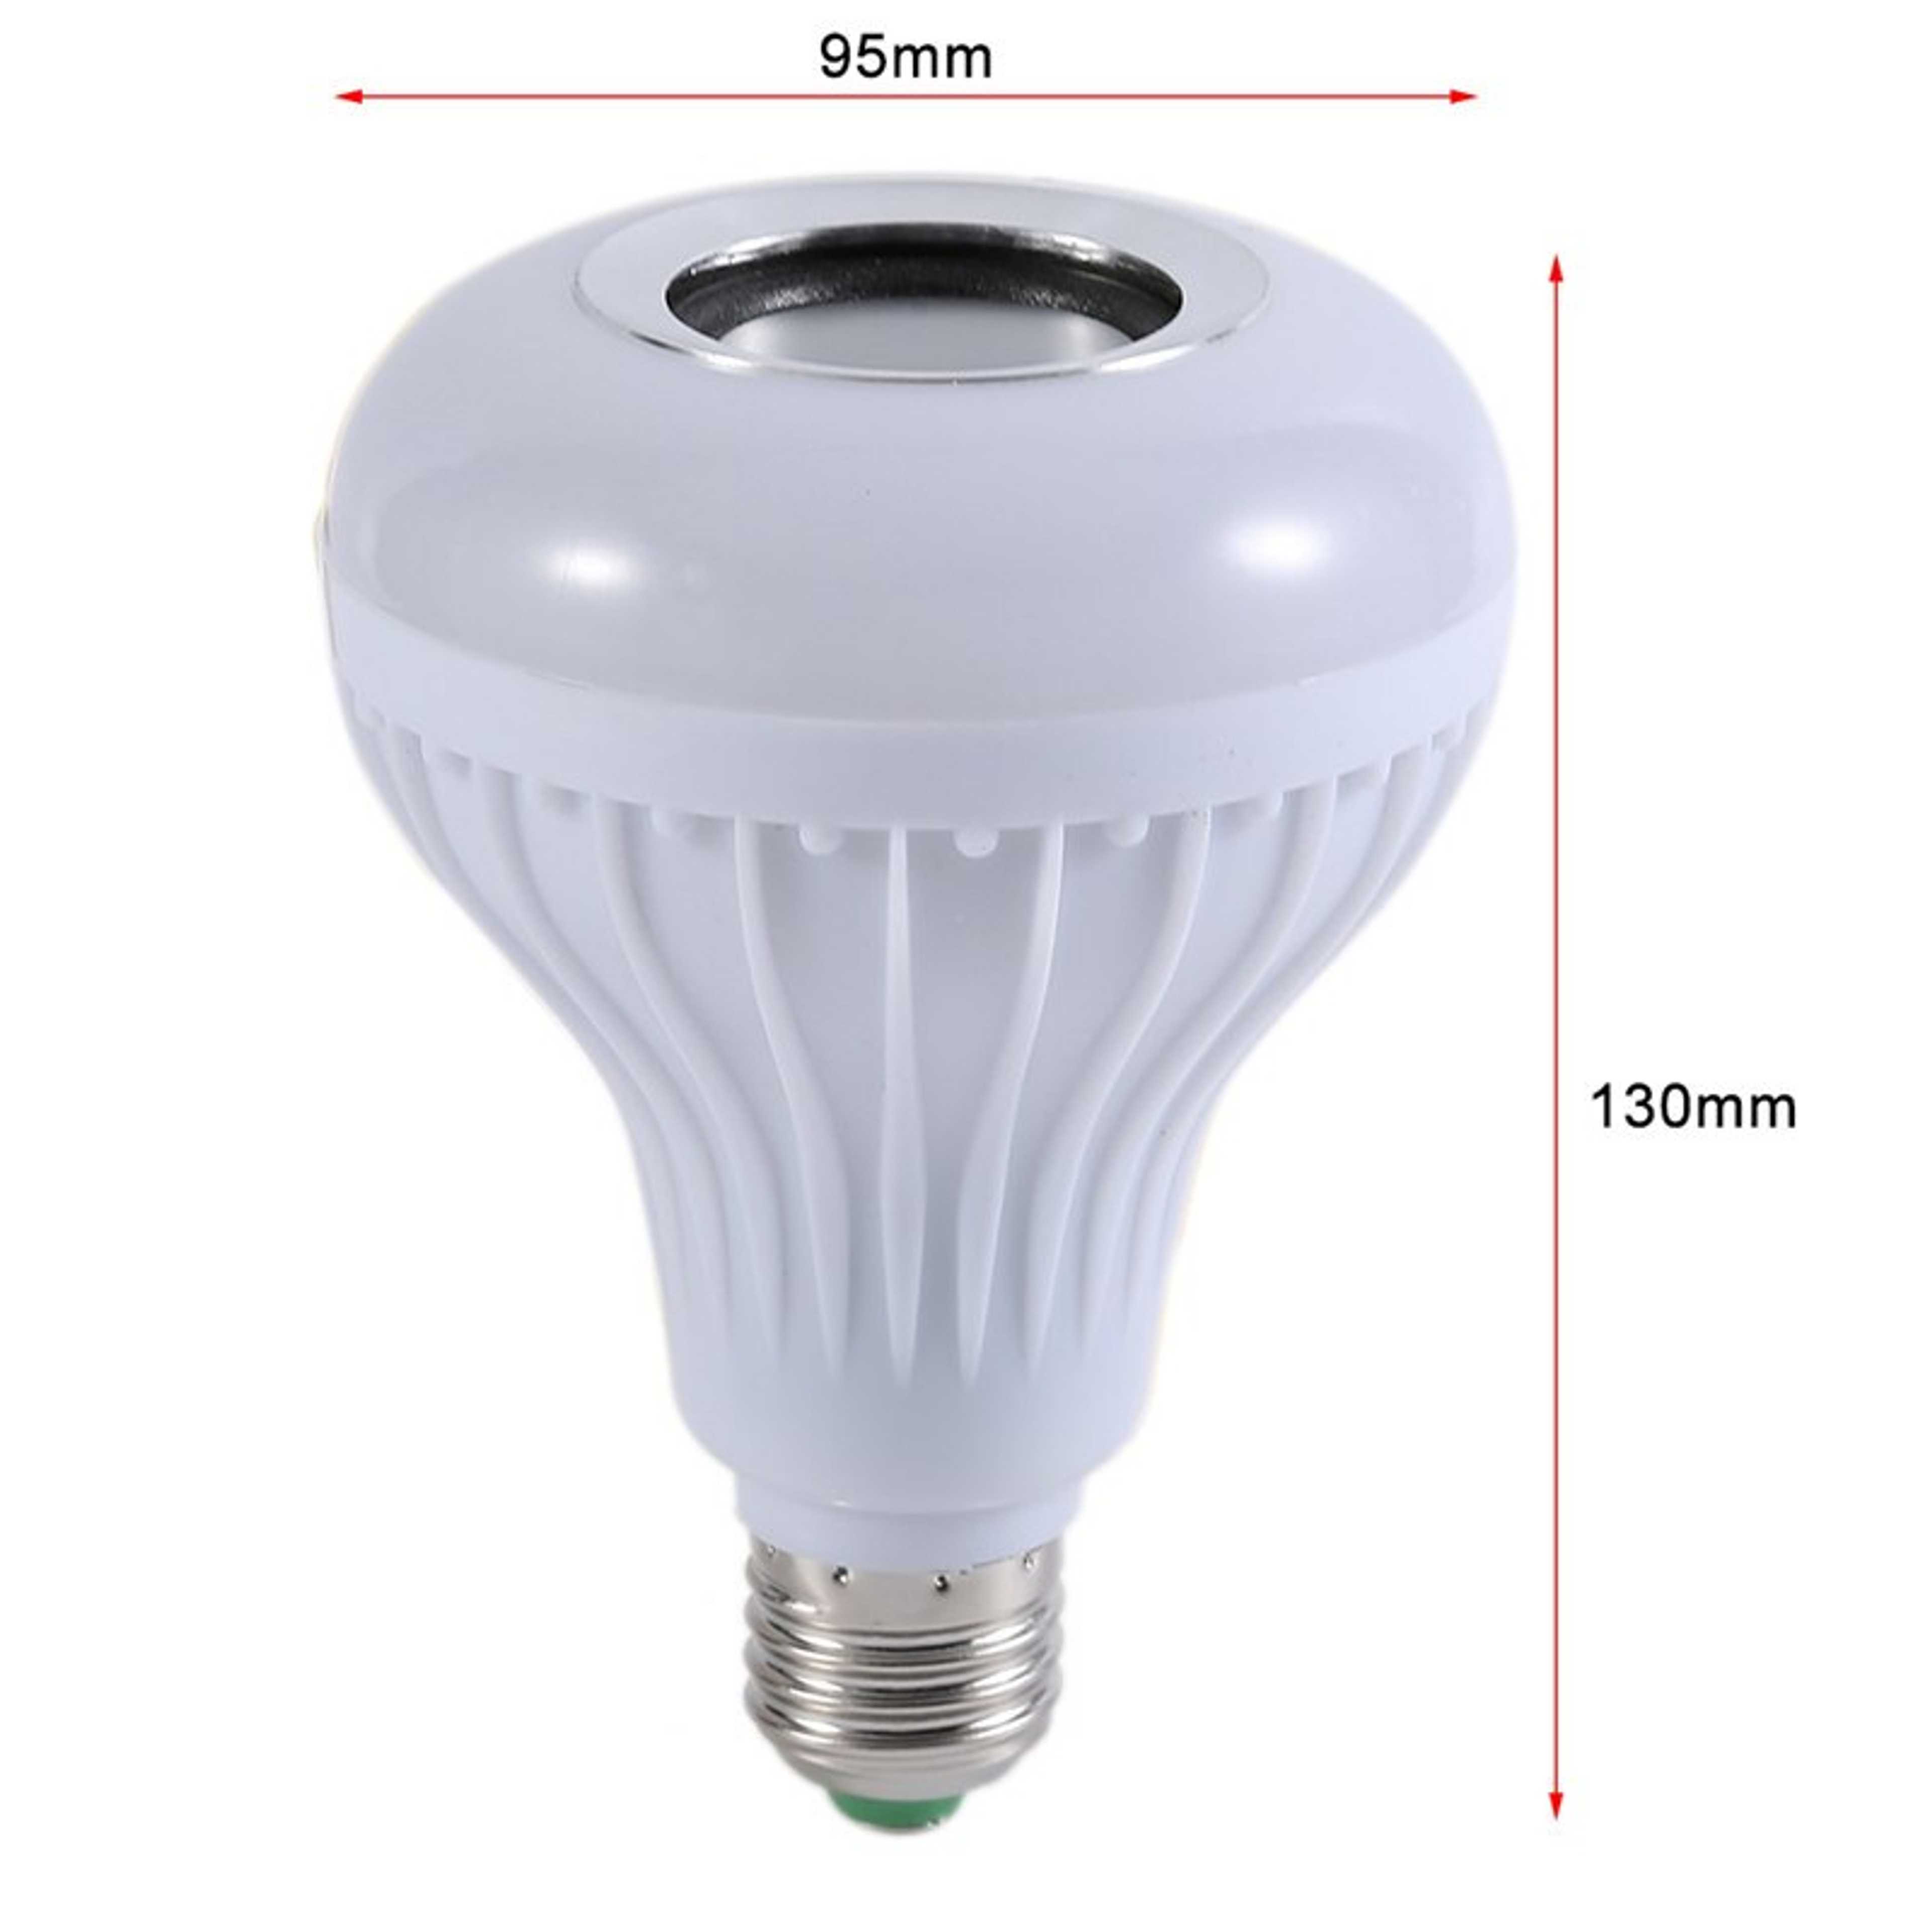 Wireless Bluetooth Speaker 12W RGB Bulb Lamp Smart Led Music Player Audio With Remote Control